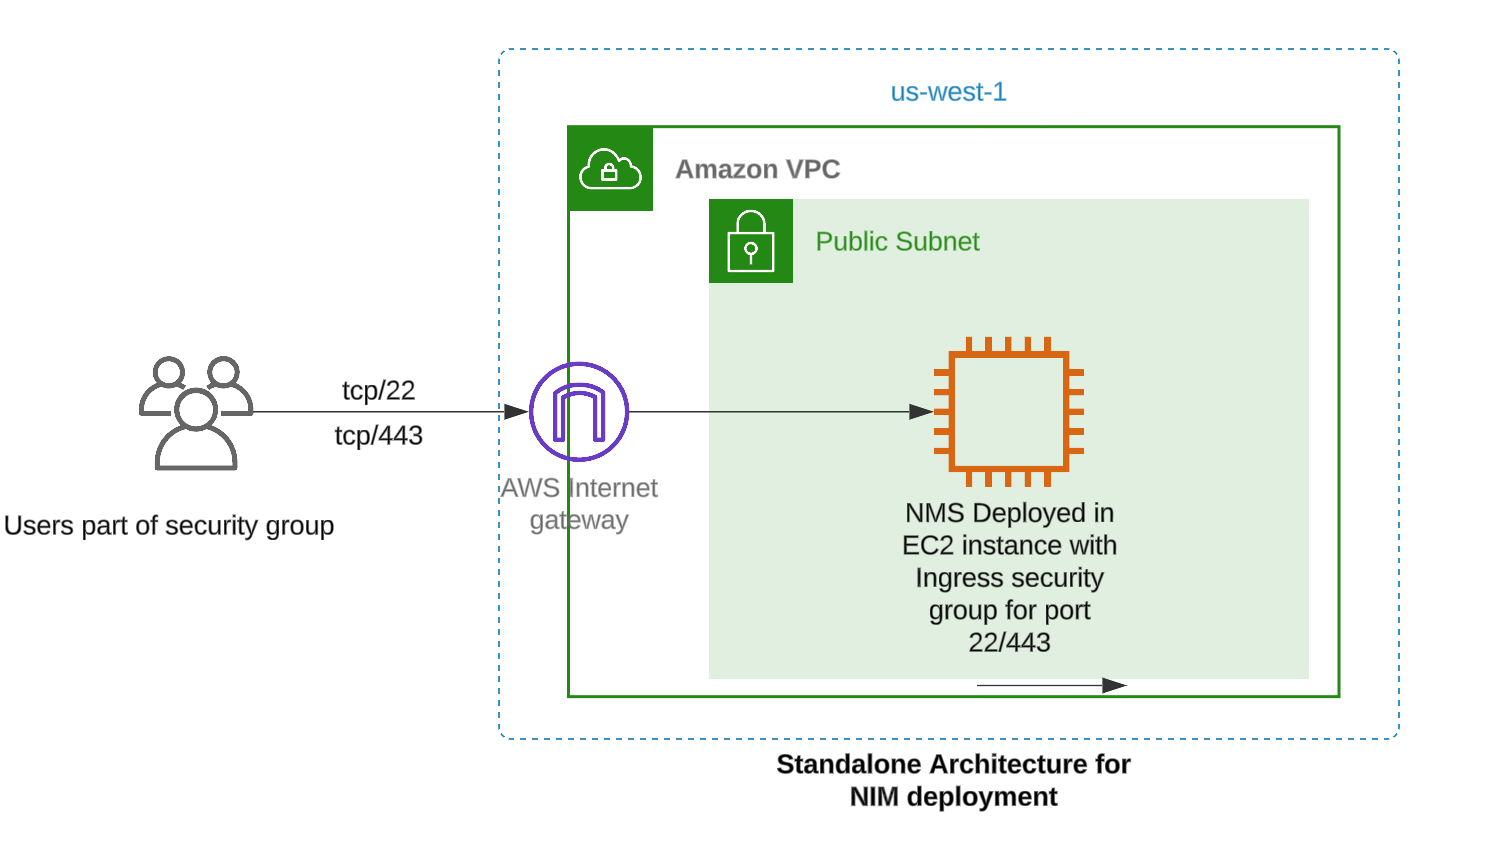 Diagram showing the standalone architecture for NGINX Management Suite deployment. The image includes an Amazon VPC with a public subnet containing NGINX Management Suite deployed in an EC2 instance. The instance is secured with an ingress security group for ports 22 and 443. Users part of the security group access the instance through an AWS Internet Gateway.